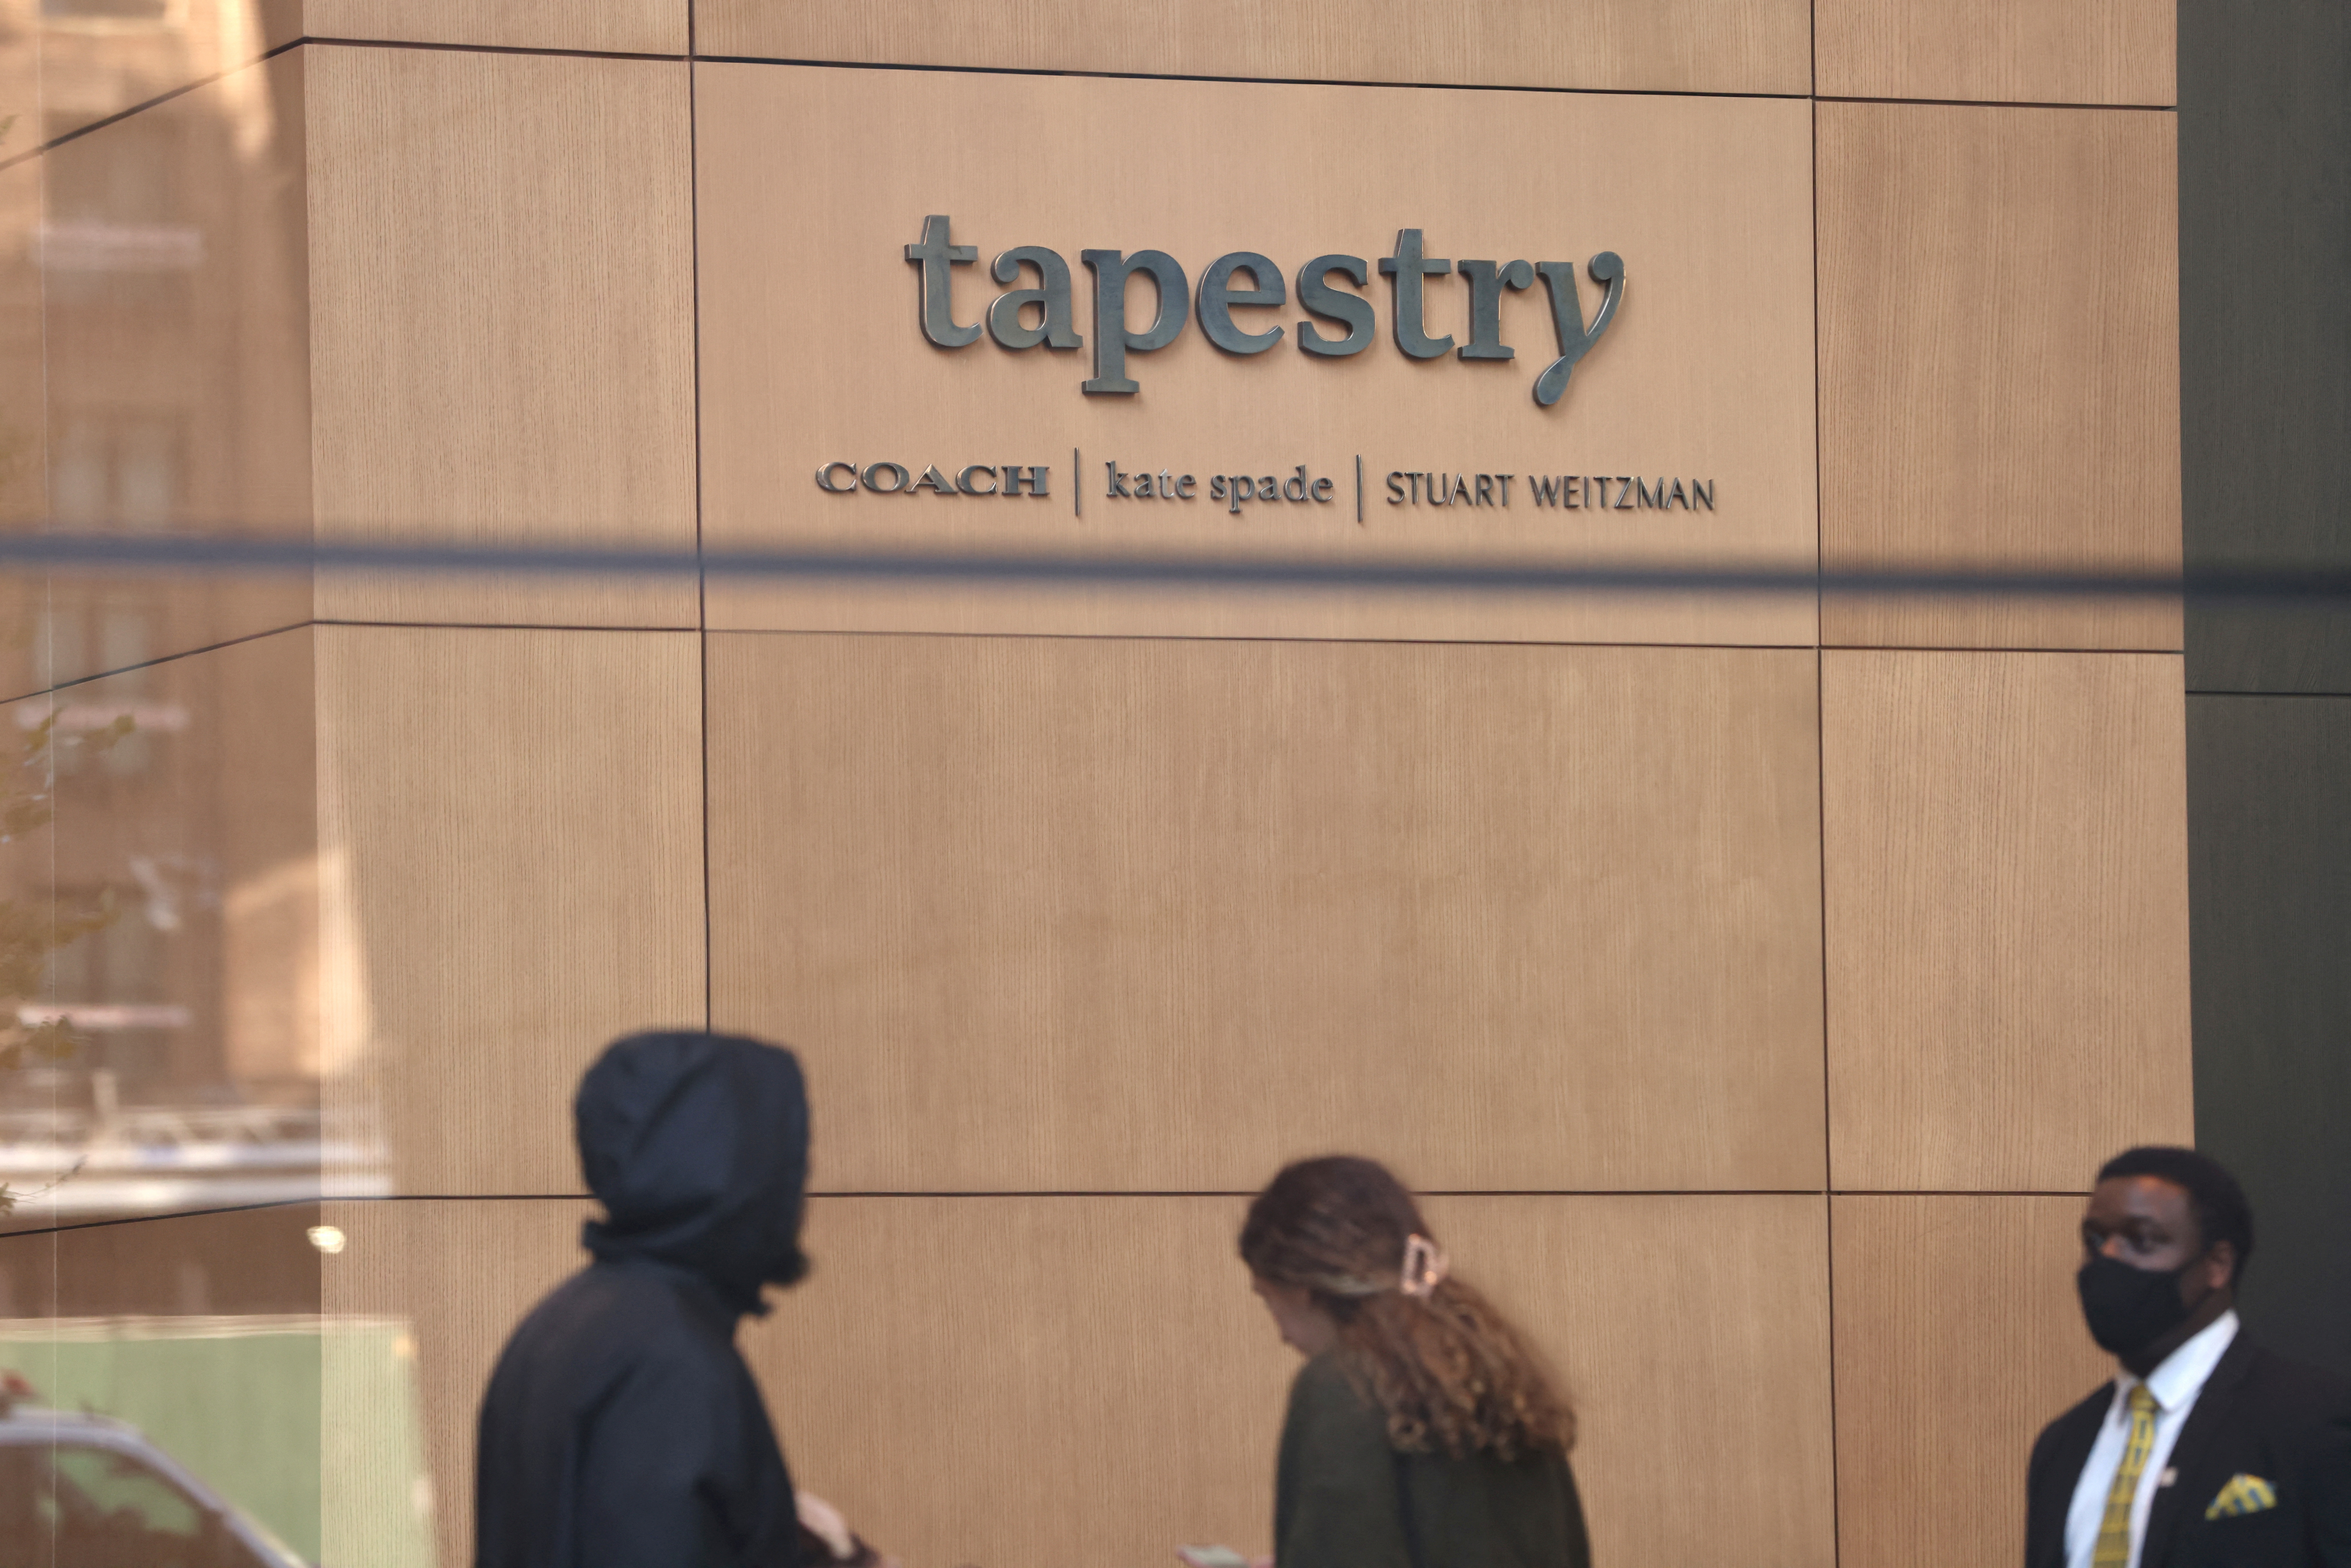 Tapestry lifts forecast as Coach bags defy U.S. luxury gloom